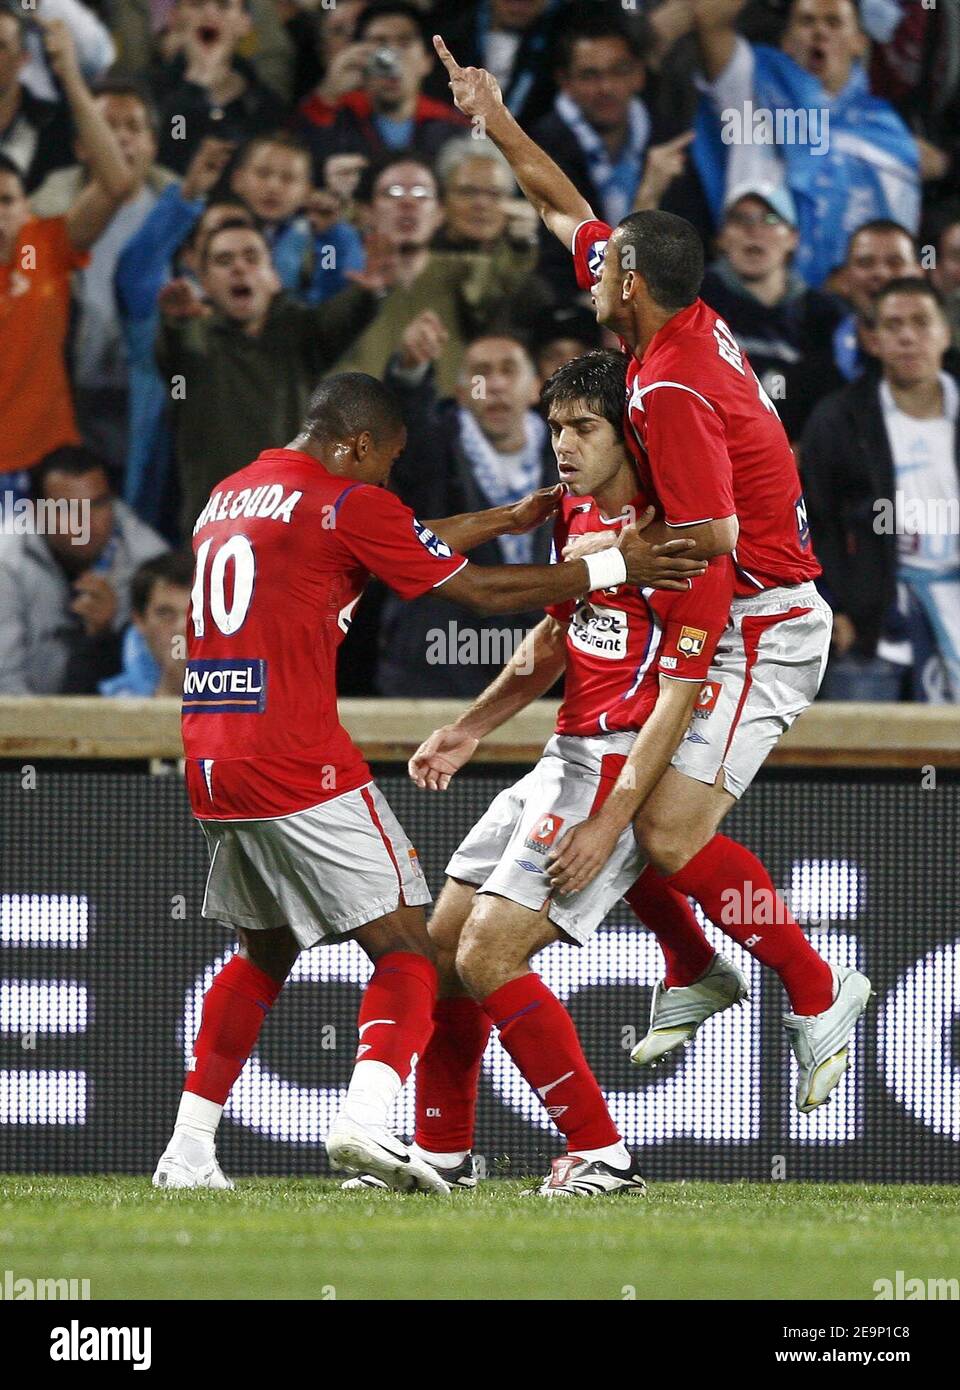 Lyon's Juninho celebrates his goal with teammates during the French first league football match, Olympique de Marseille vs Olympique Lyonnais, at the Velodrome stadium, in Marseille, France, on October 22, 2006. Lyon won 4-1. Photo by Christian Liewig/ABACAPRESS.COM Stock Photo